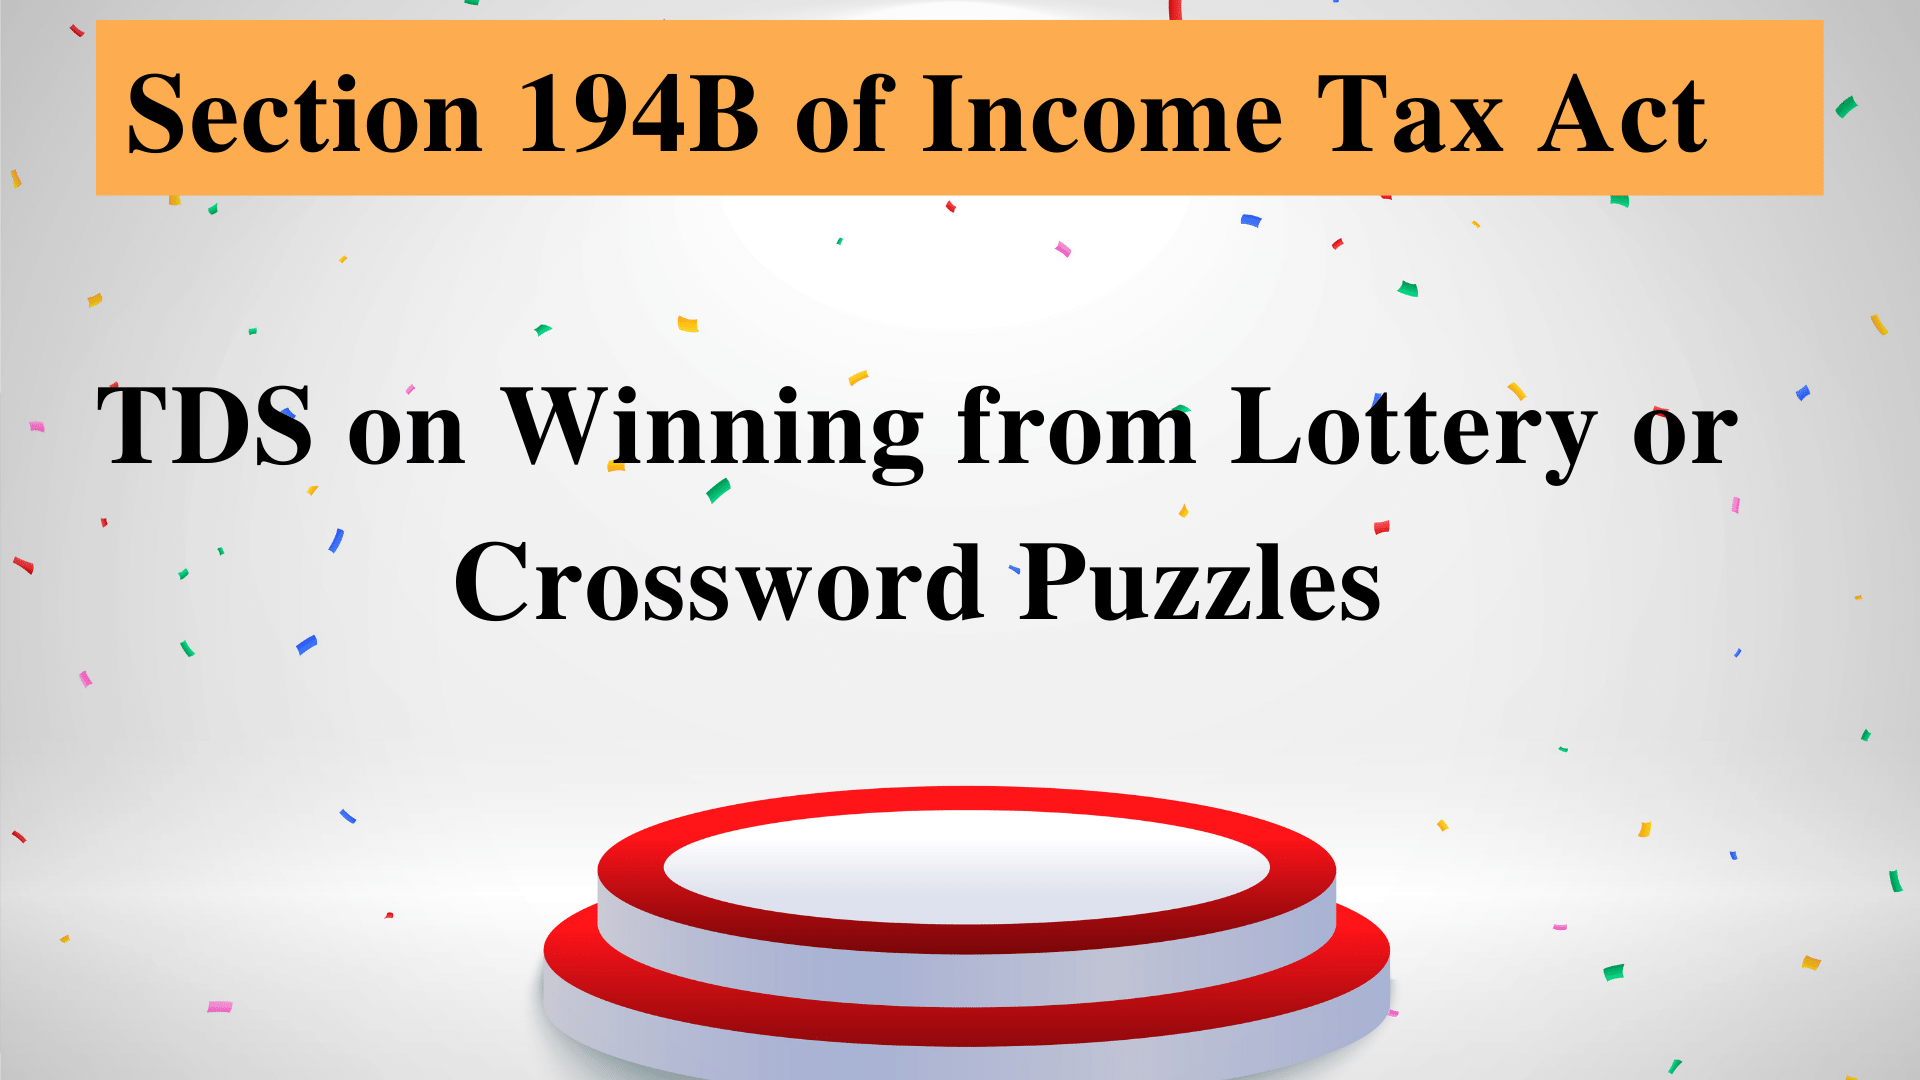 Section 194B of Income Tax Act - TDS on Winning from Lottery or Crossword Puzzles